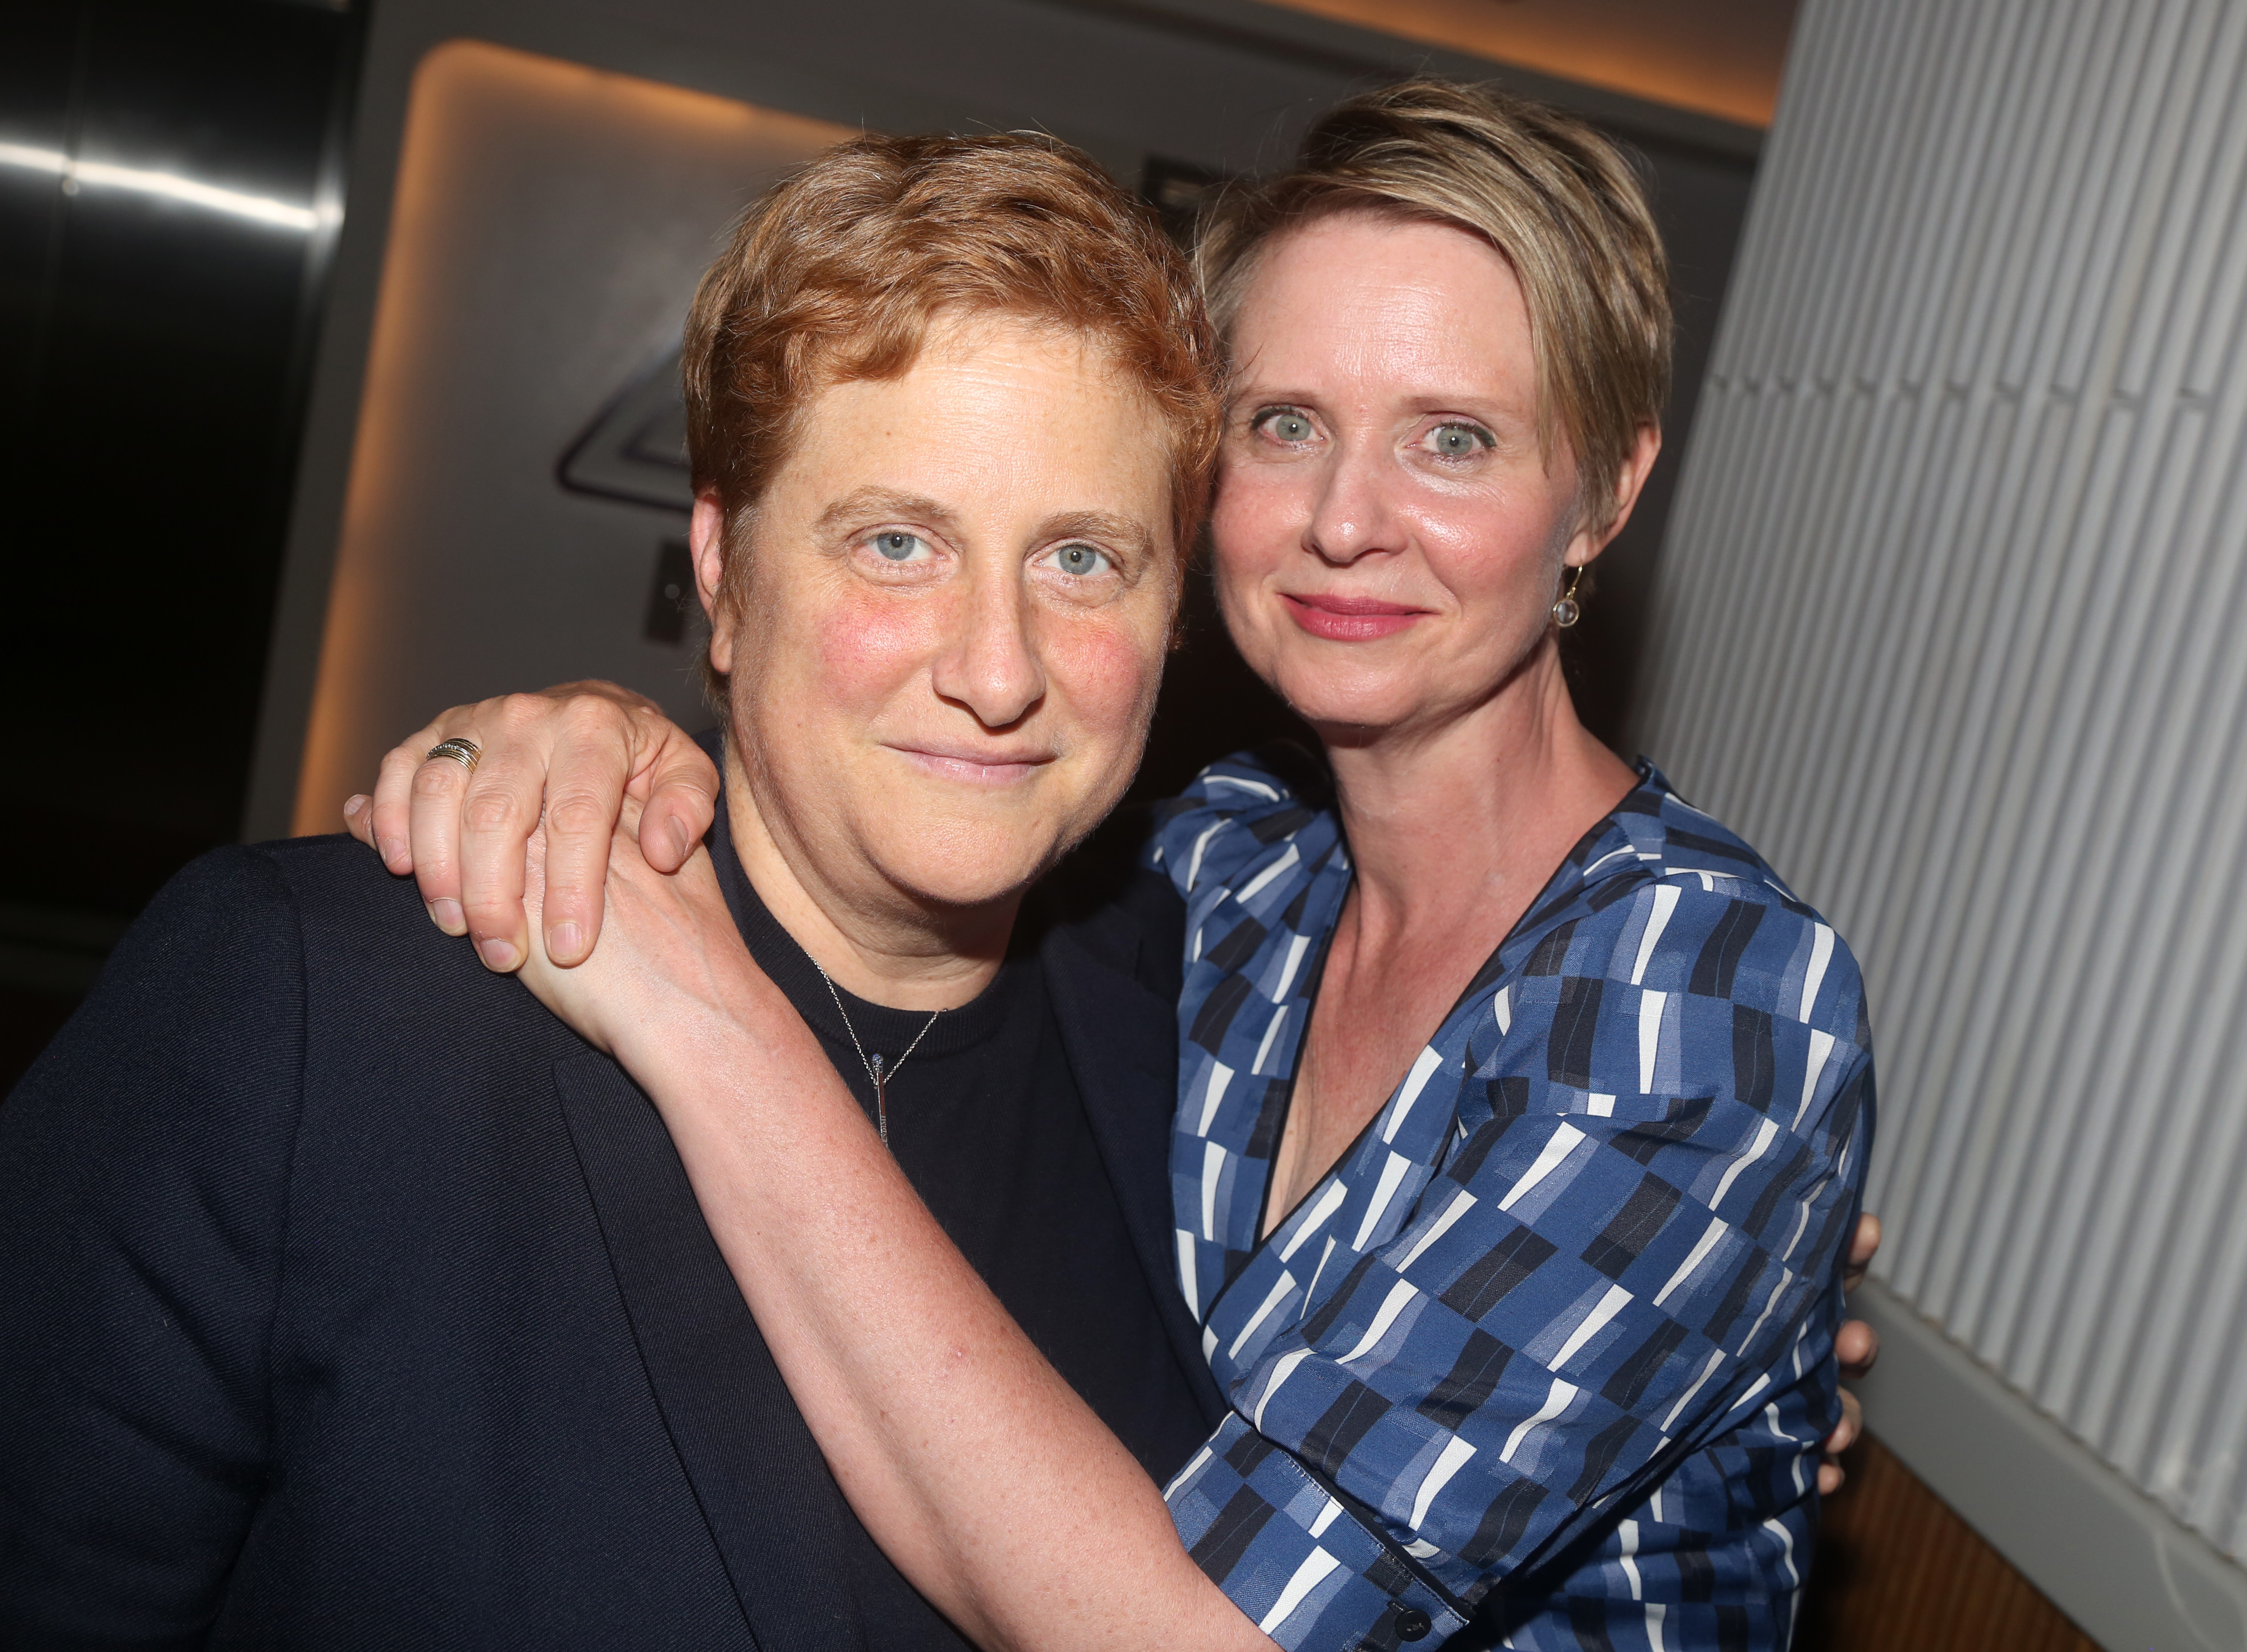 Christine Marinoni and Cynthia Nixon pose at the opening night after party for The New Group Theater production of "The True"at Yotel's Green Fig Urban Eatery on September 20, 2018, in New York City | Source: Getty Images